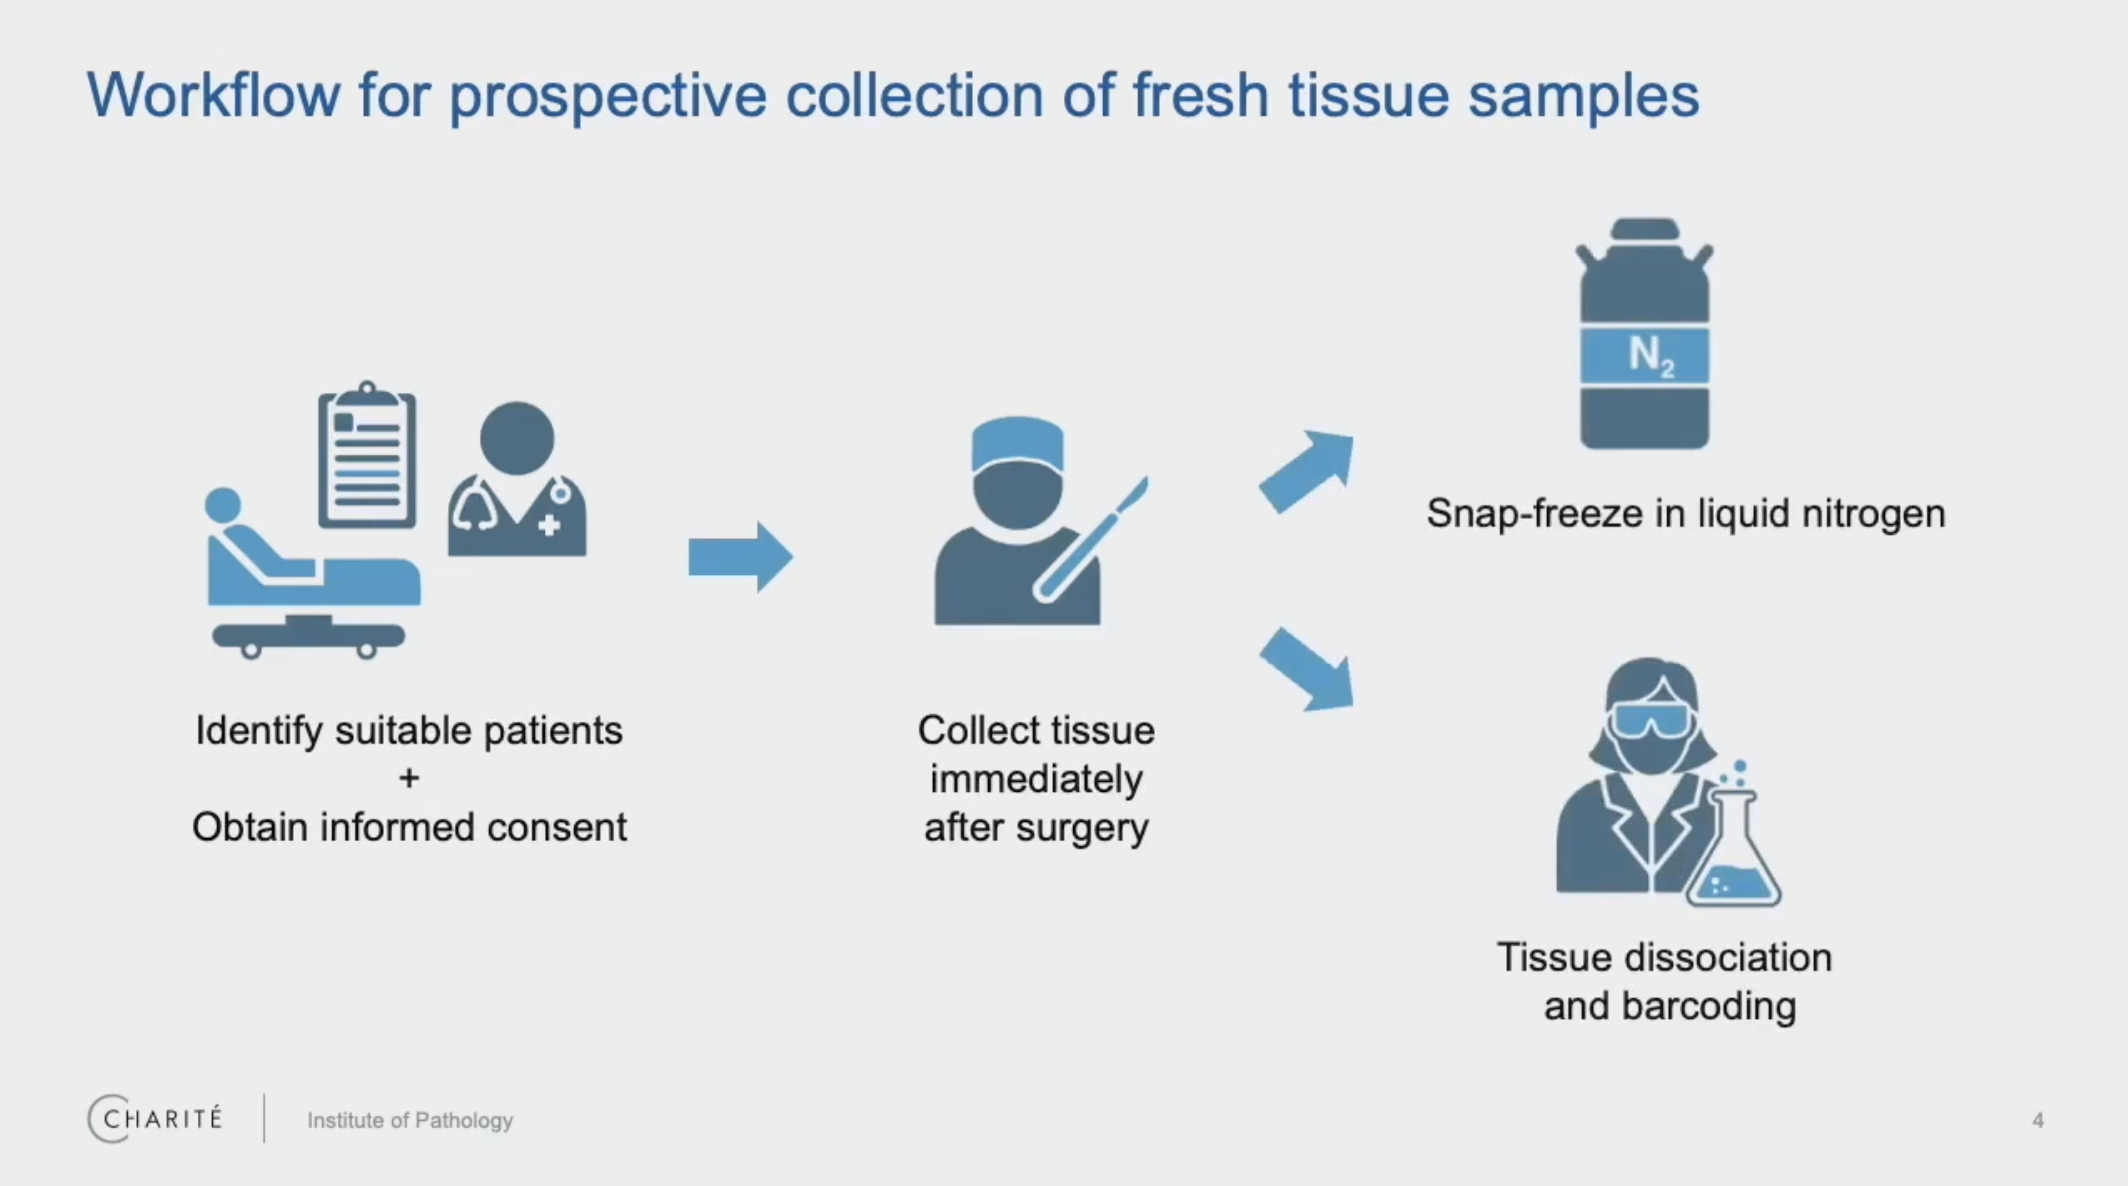 Screenshot from Dr. Philip Bischoff’s webinar with 10x Genomics, “Single cell analysis of FFPE tissue: Experiences and considerations from a pathologist’s perspective.” https://www.10xgenomics.com/videos/14oda4rnyh?autoplay=true